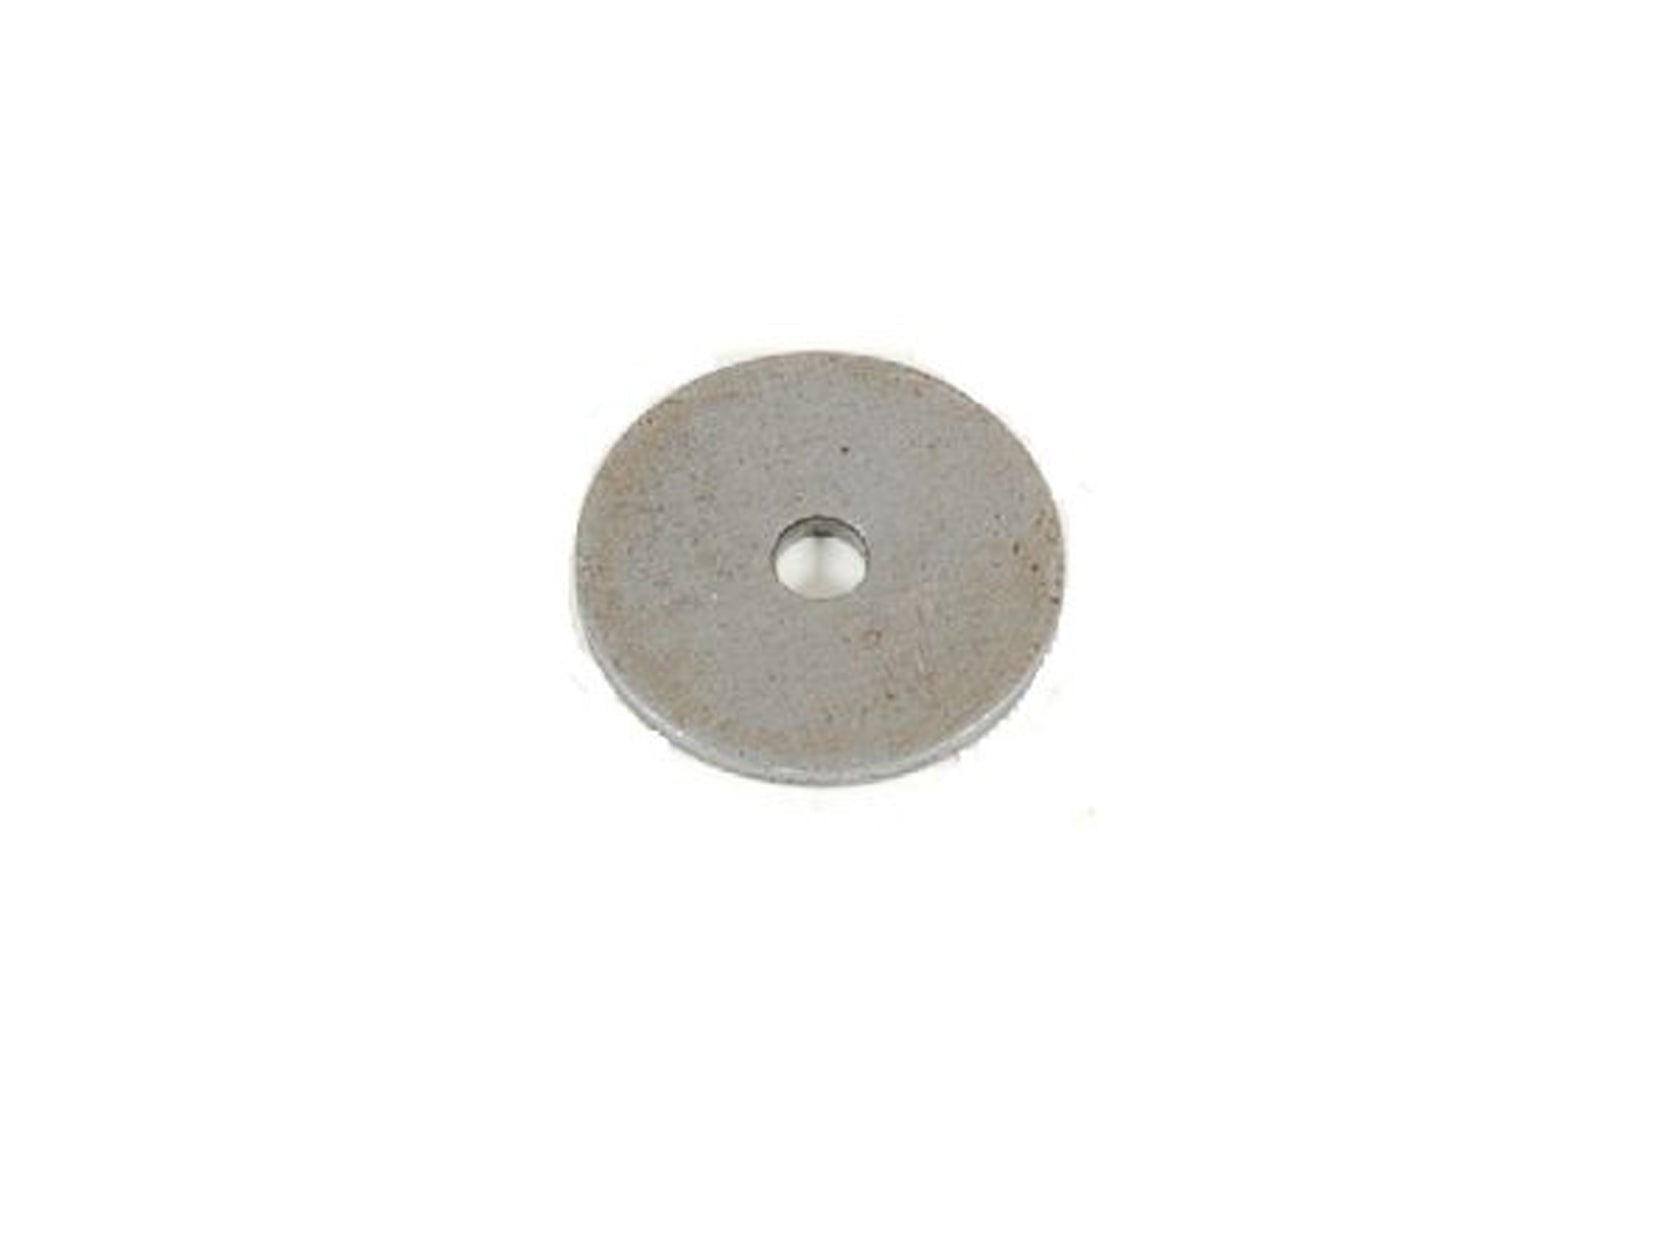 8mm Axle Washer